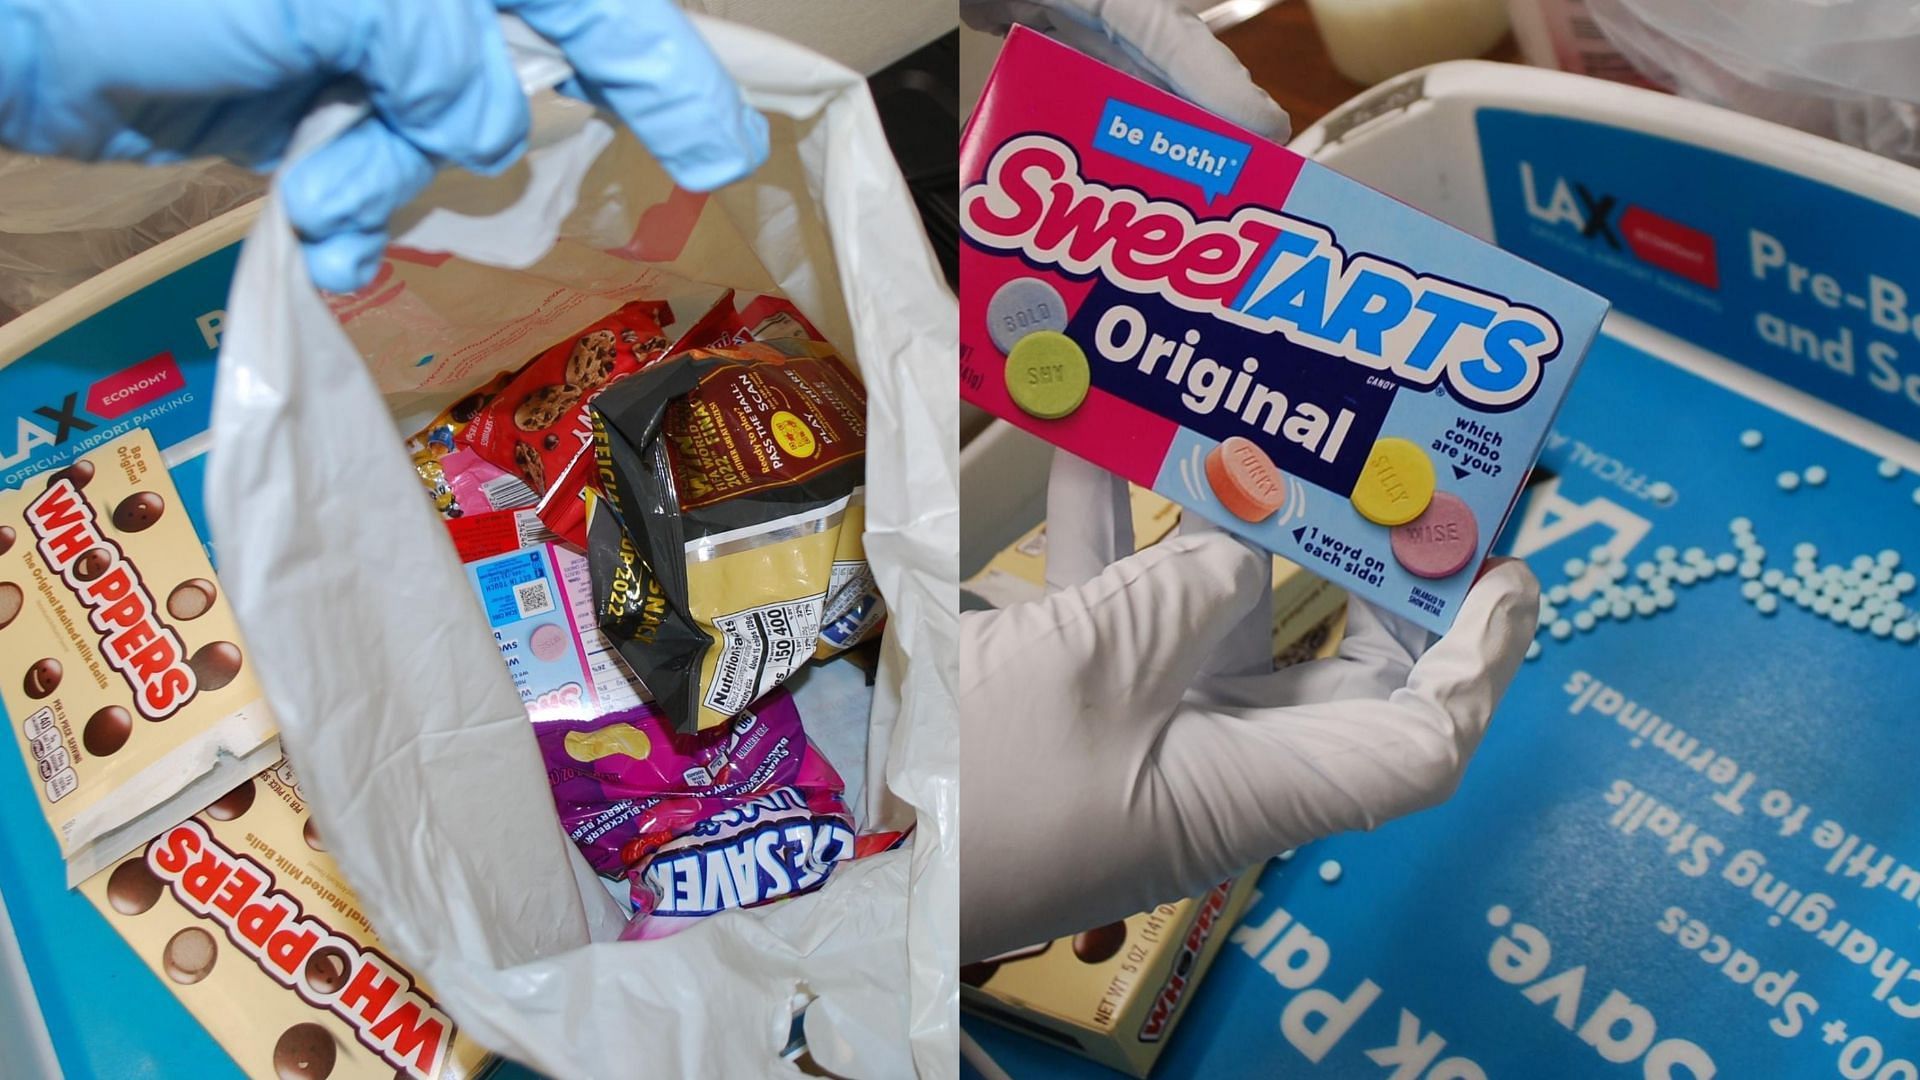 The drugs were found in sealed candy bags (Image via lasd.org)